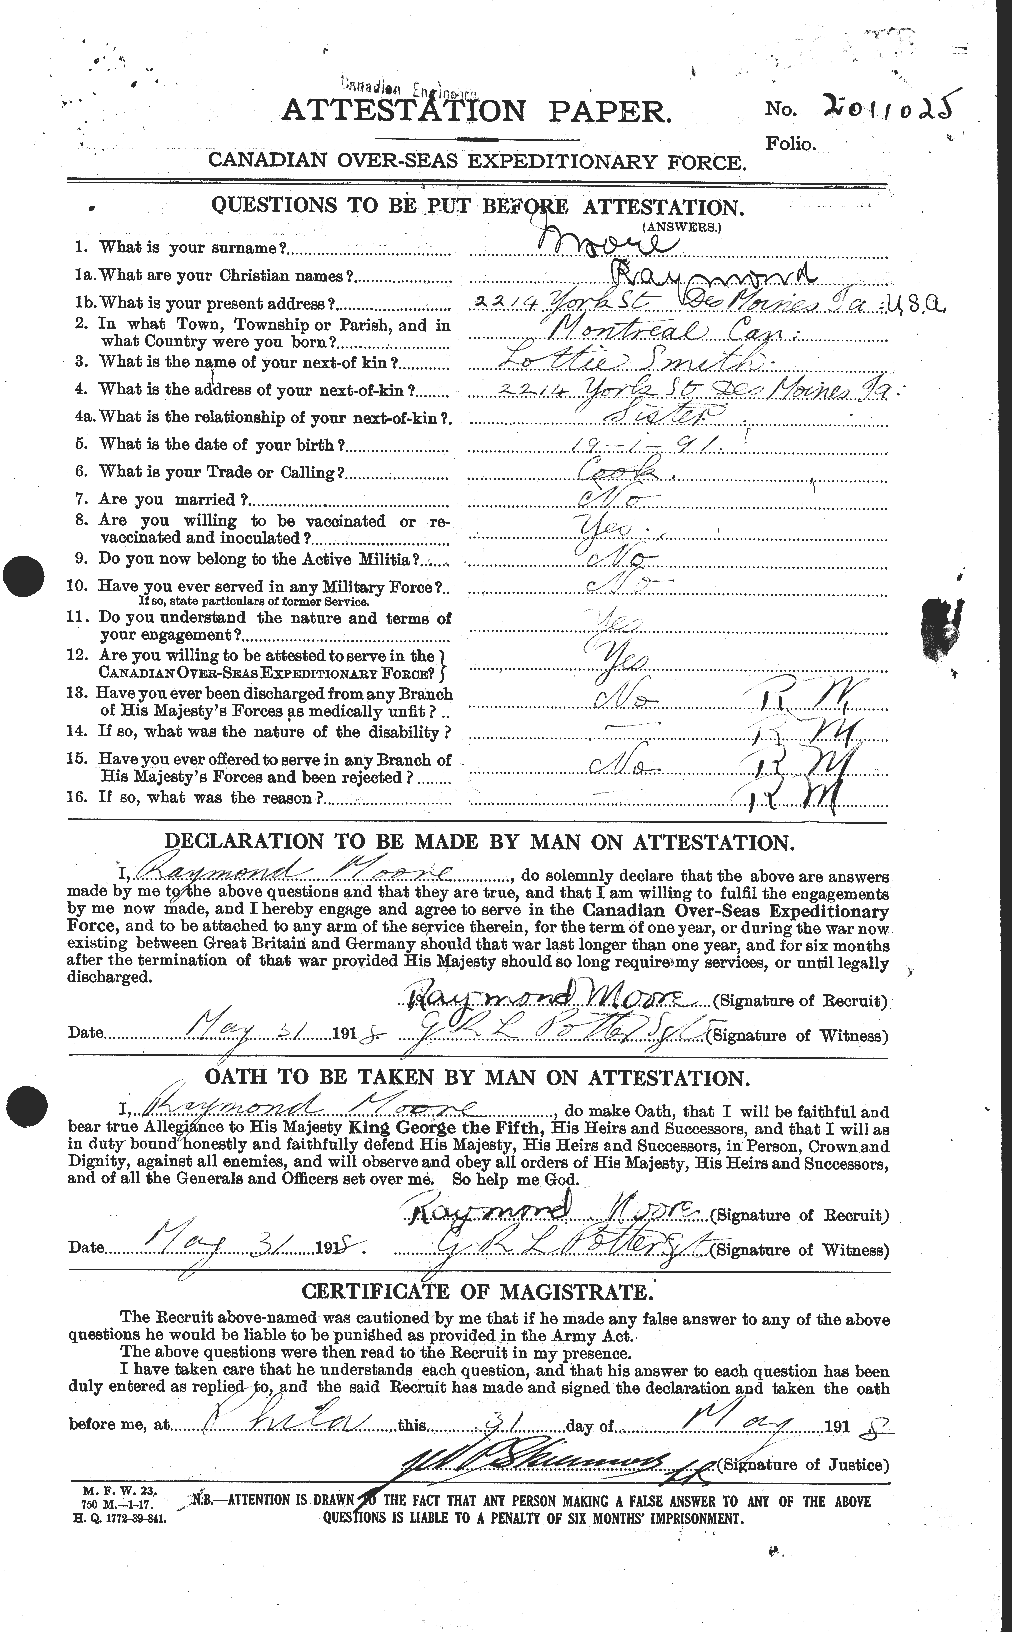 Personnel Records of the First World War - CEF 503518a